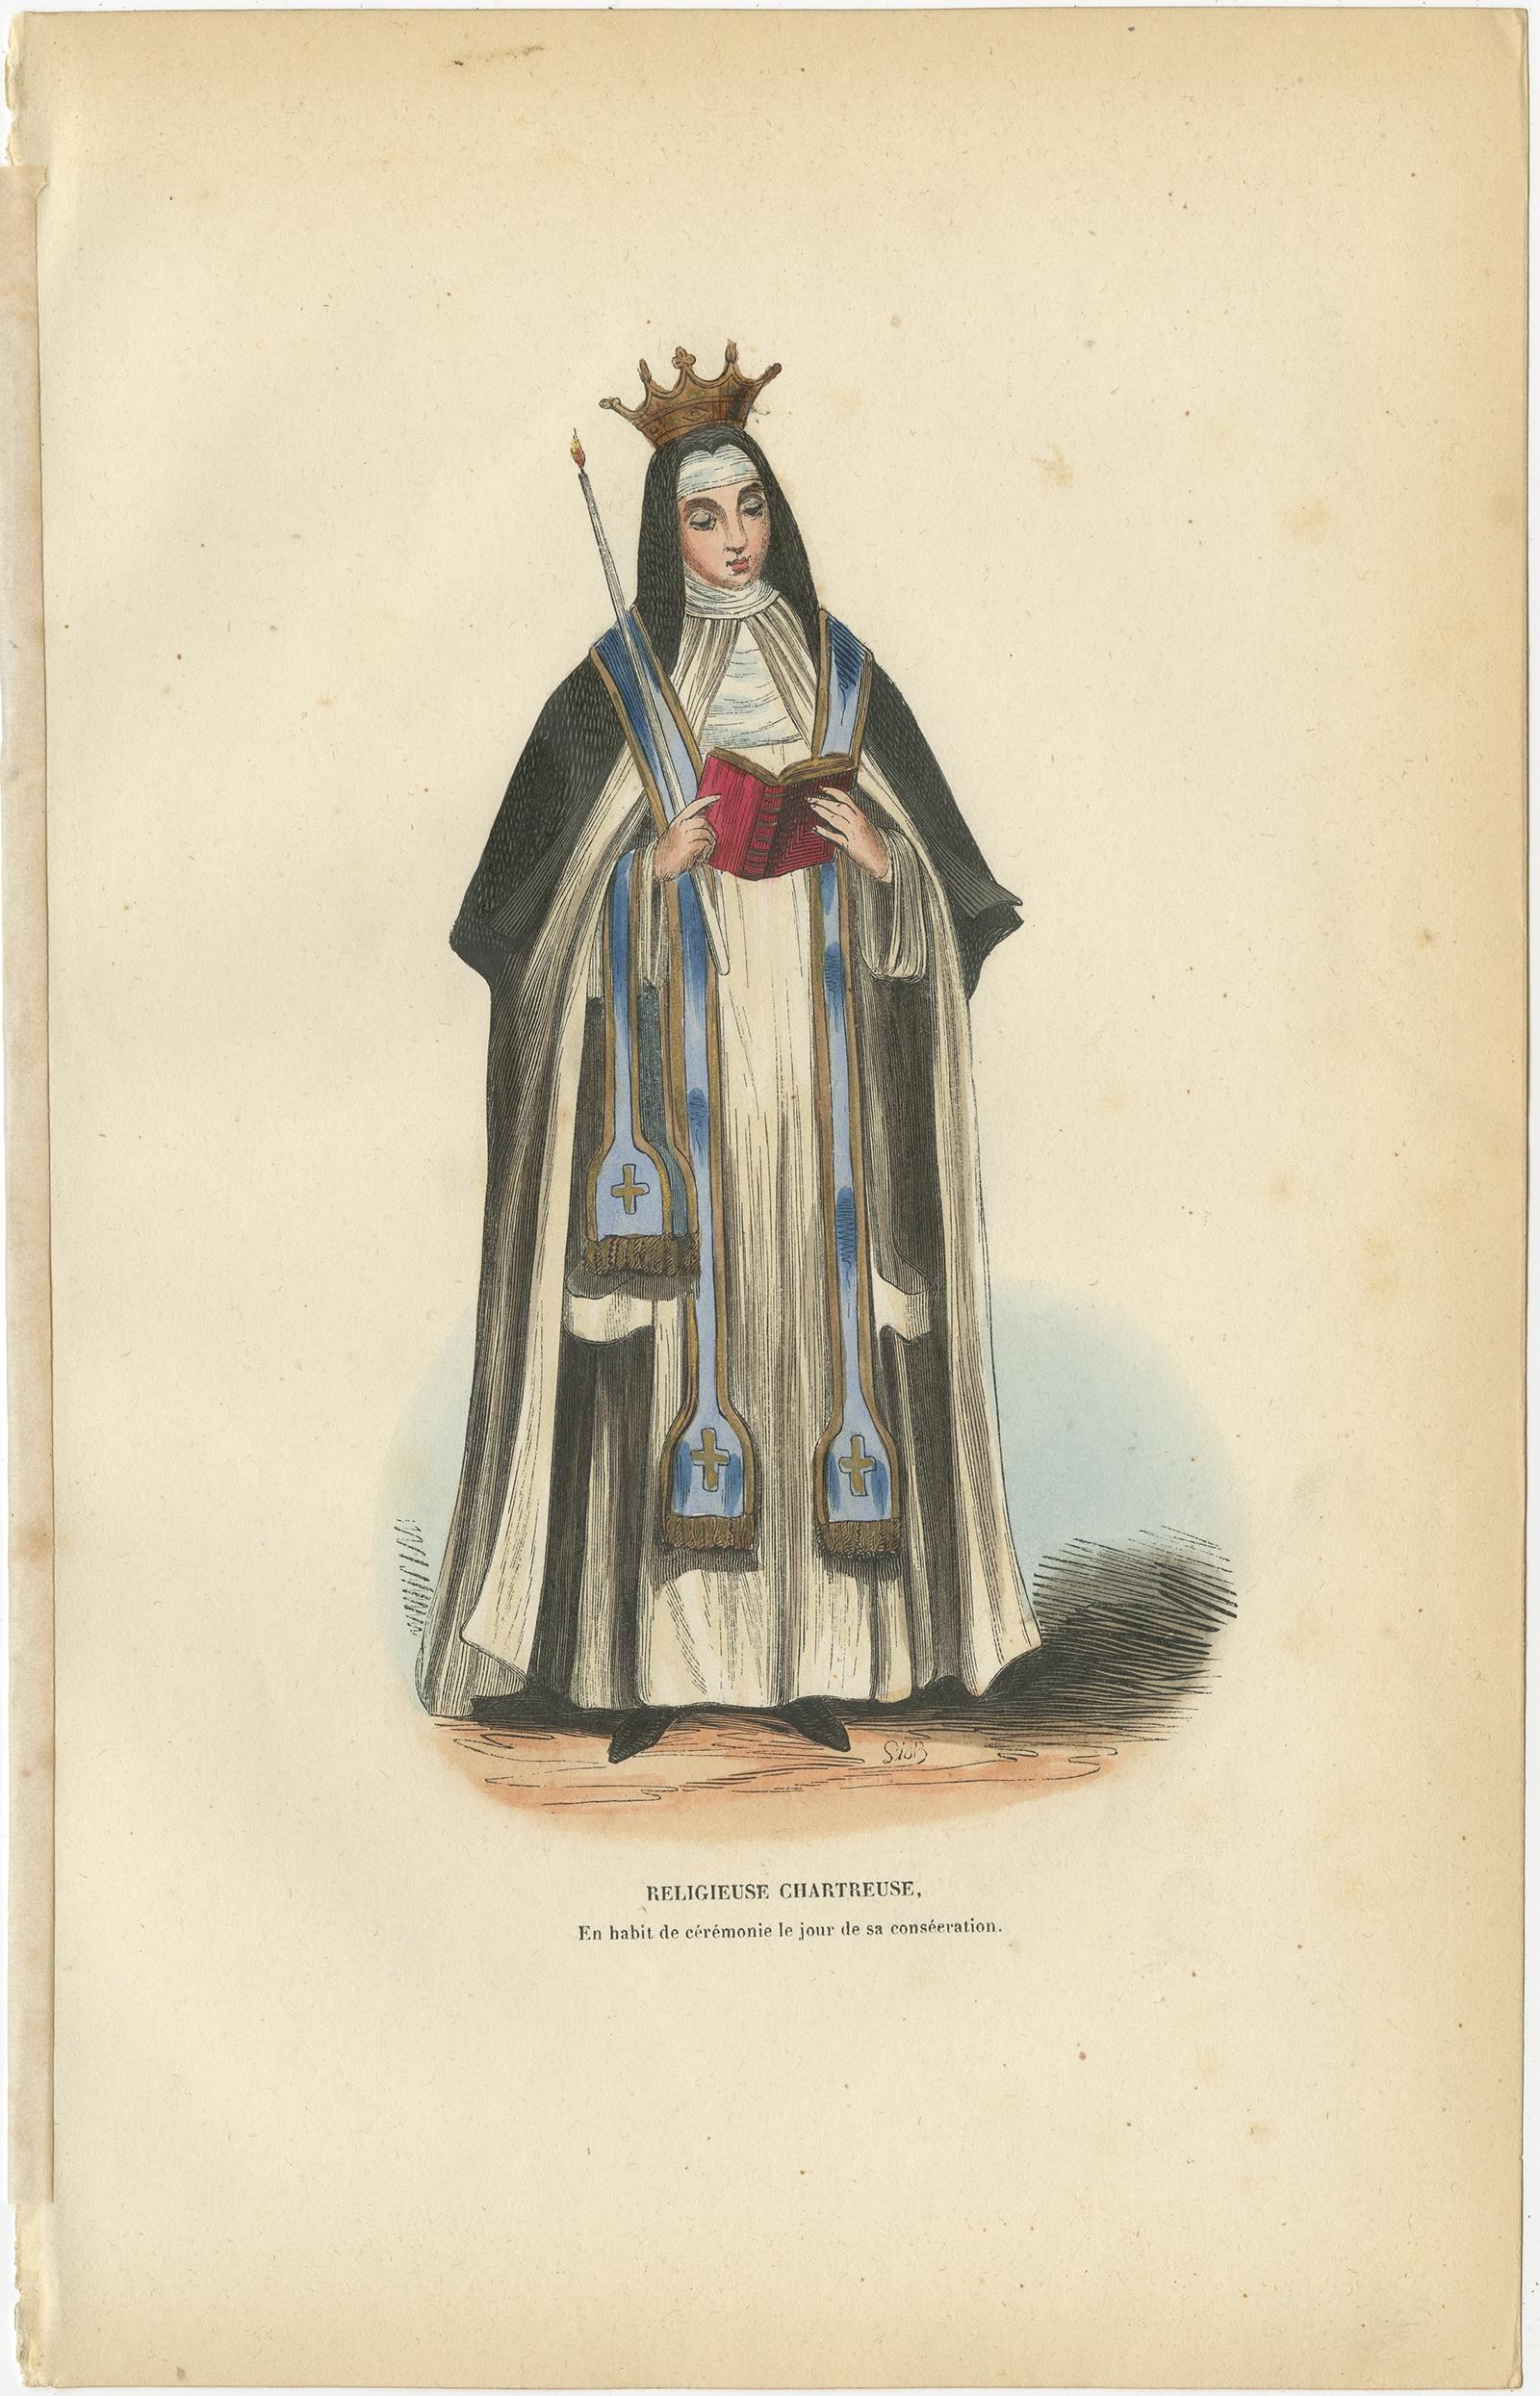 Antique print titled 'Religieuse Chartreuse'. Print of a Carthusian Nun. This print originates from 'Histoire et Costumes des Ordres Religieux'.

The Carthusians, also known as the Order of Carthusians (Latin: Ordo Cartusiensis), are a Latin